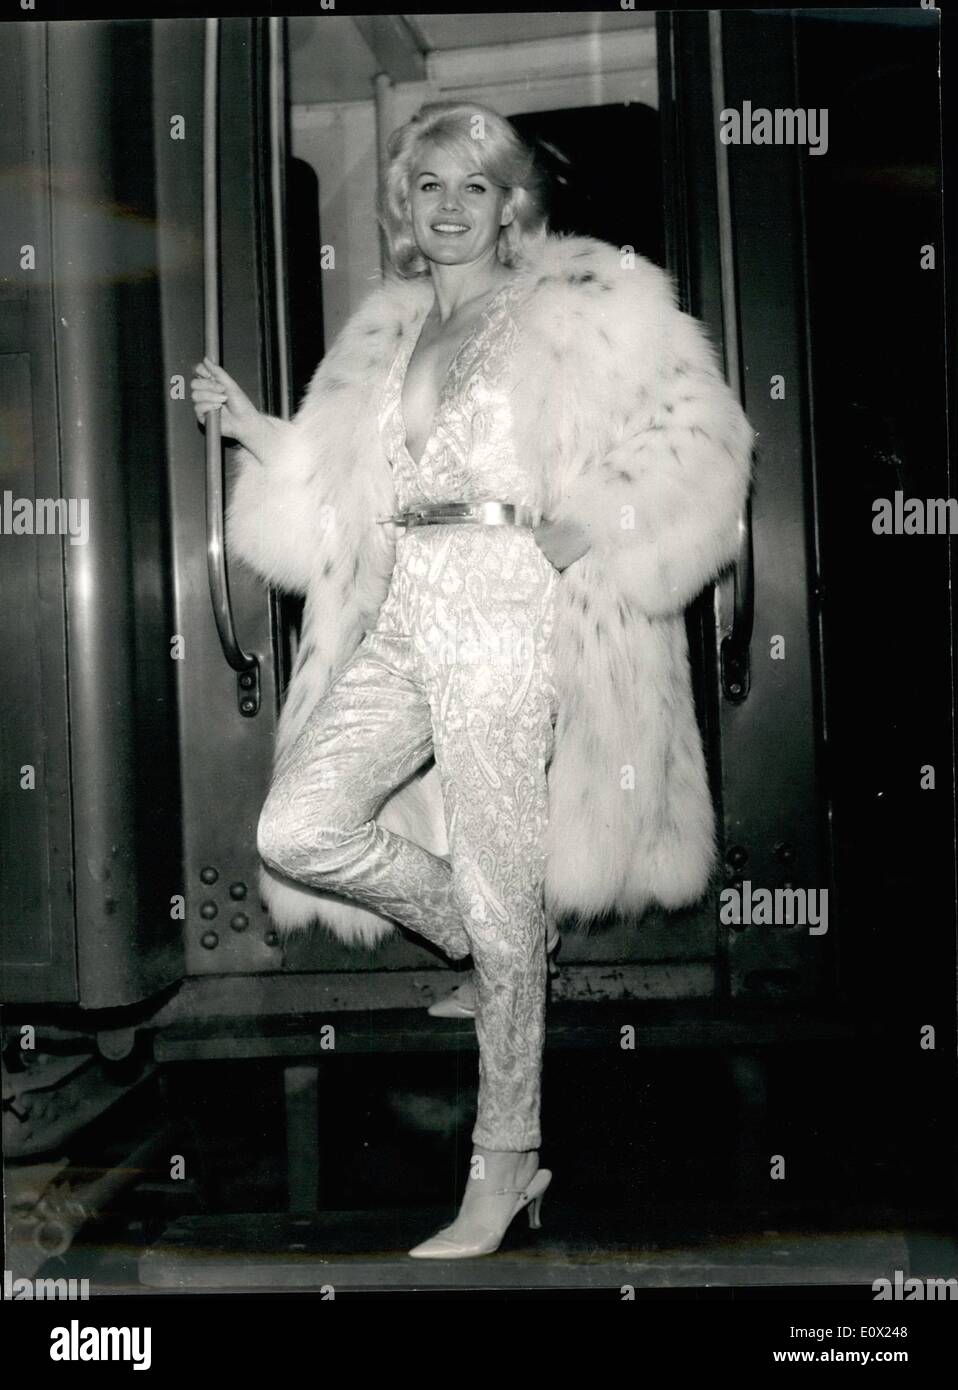 Nov. 11, 1964 - Carrol Baker: Back To Hollywood. Photo shows Carrol Baker Wearing Gorgeous White Satin Pyjamas Pictured As She Board The Boat Train At Saint Lazare Station This Afternoon. Stock Photo